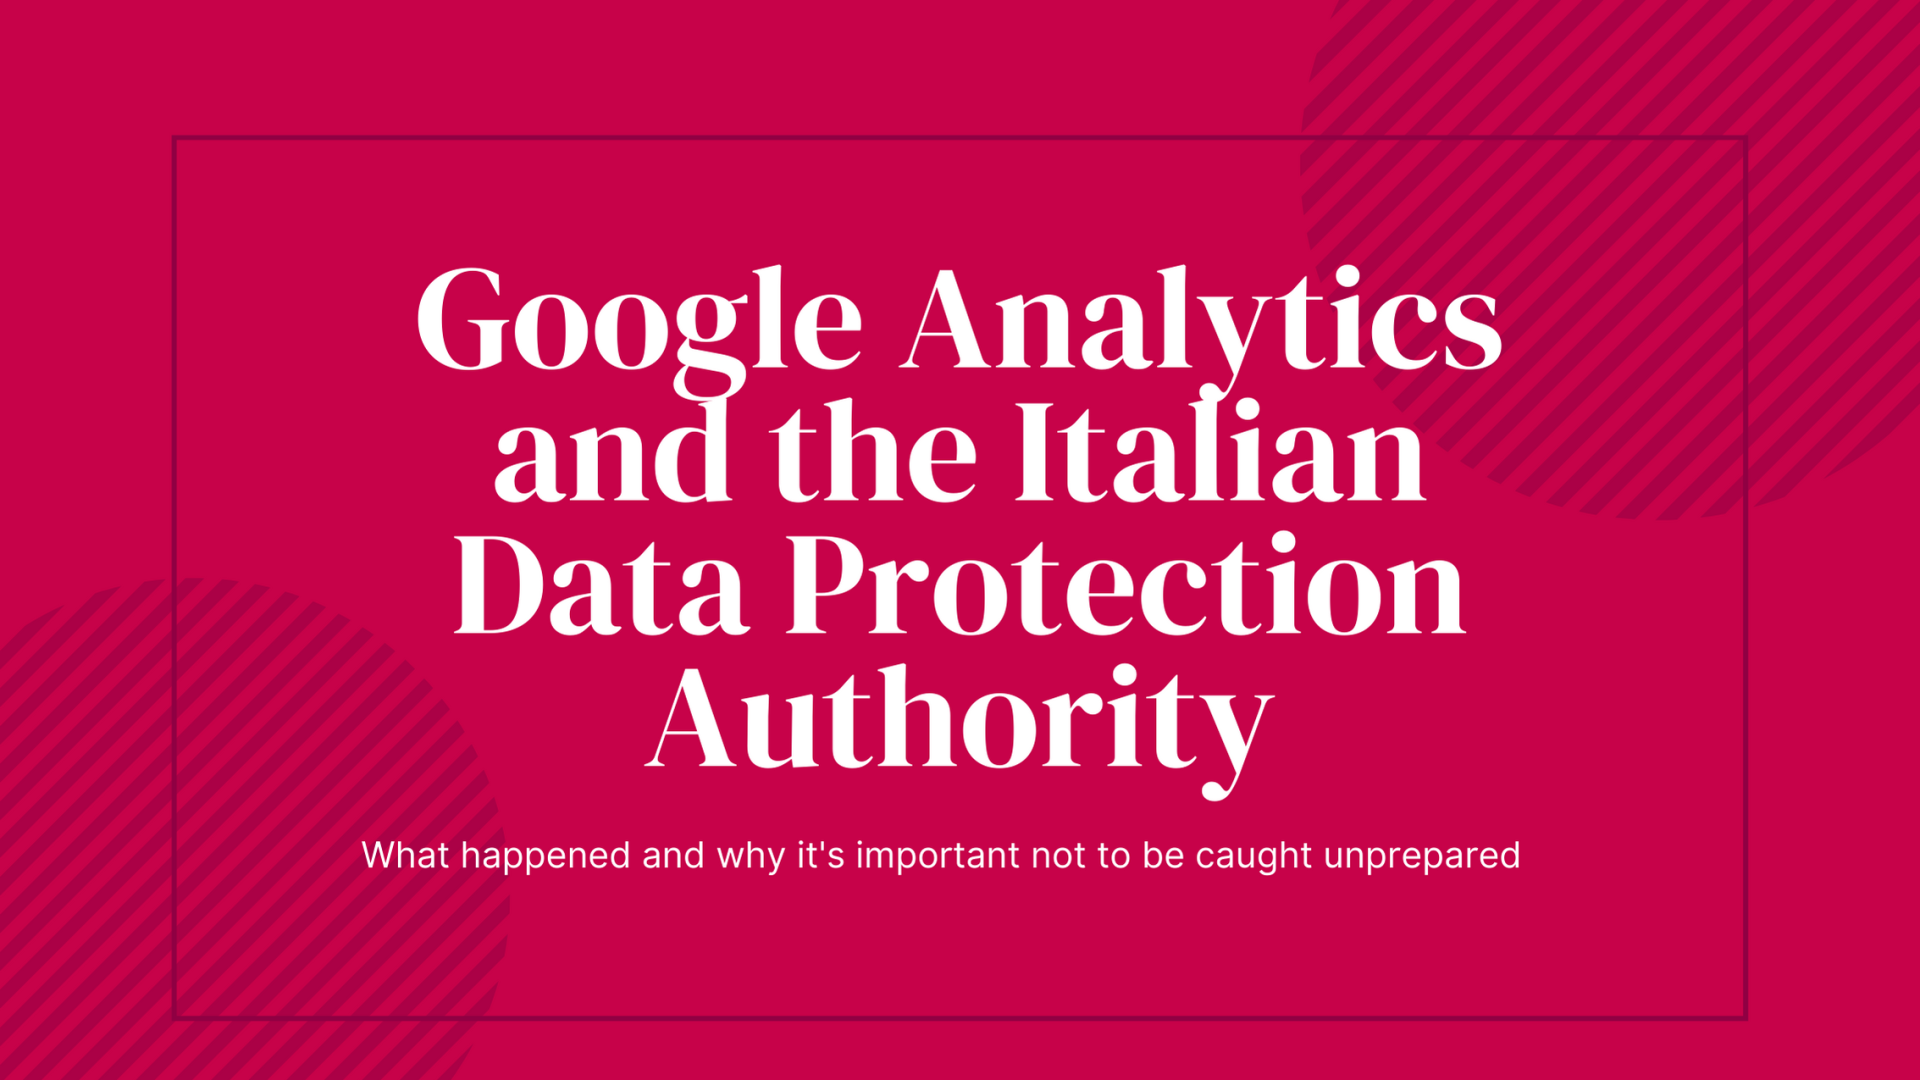 Google Analytics and the Italian Data Protection Authority: what happened and why it’s important not to be caught unprepared